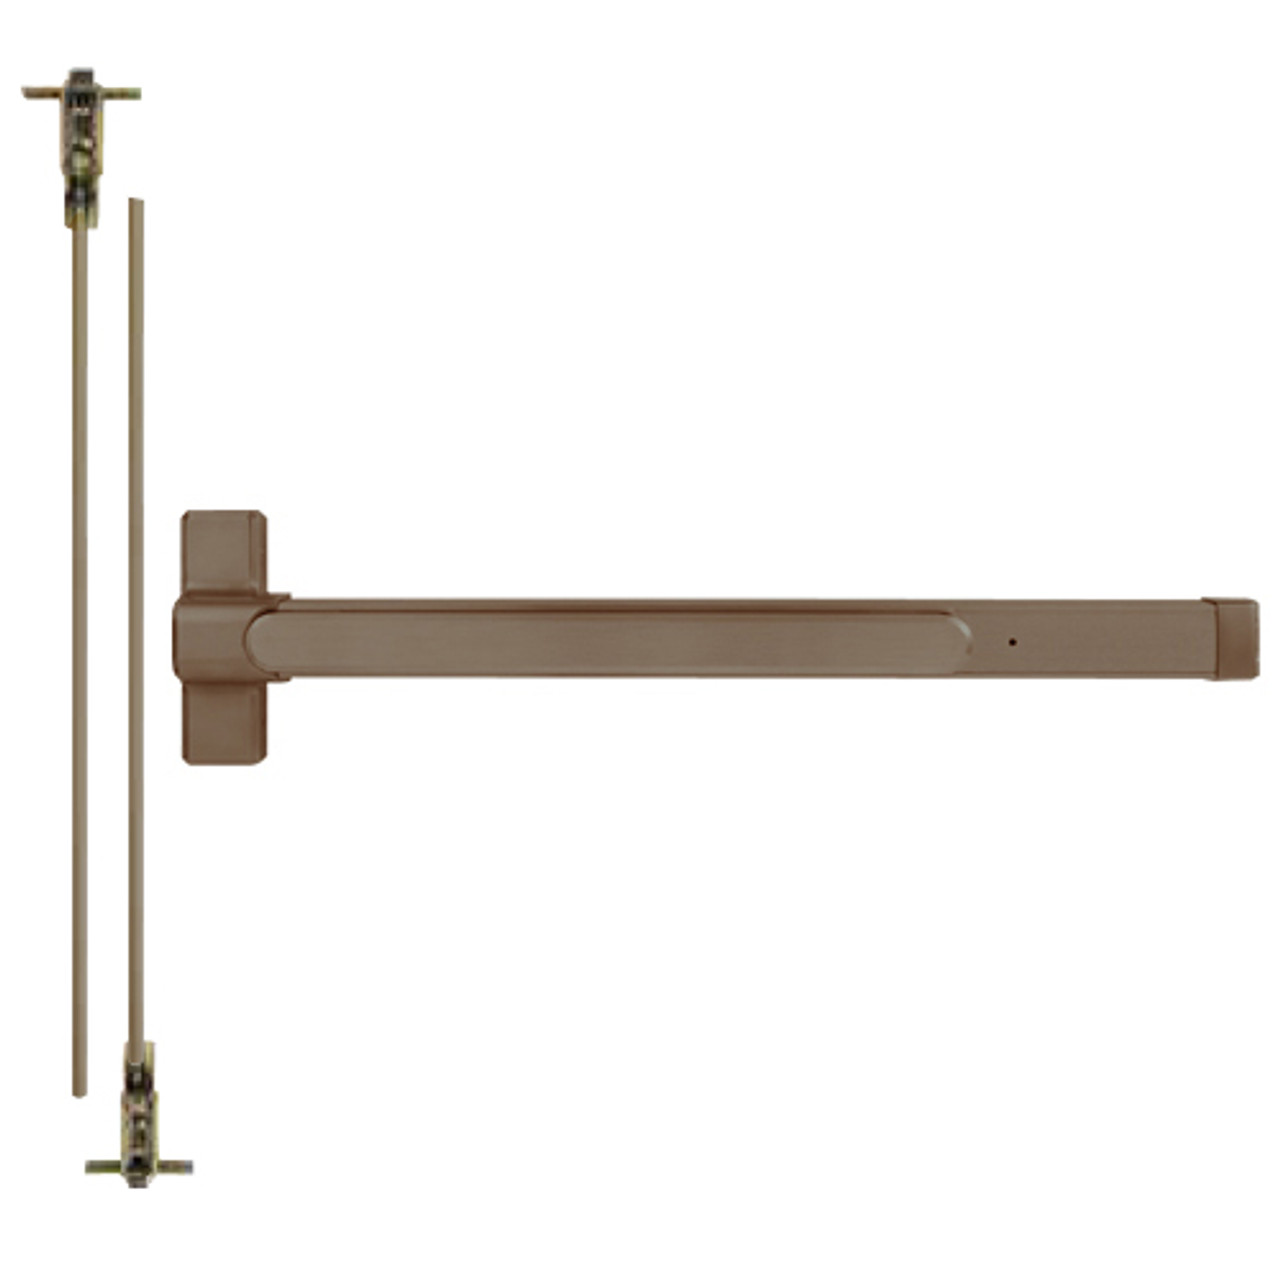 QED125X-48-8-313AN-LC Stanley QED100 Series Heavy Duty Concealed Vertical Rod Cylinder Dog Exit Device in Anodized Duranodic Bronze Finish